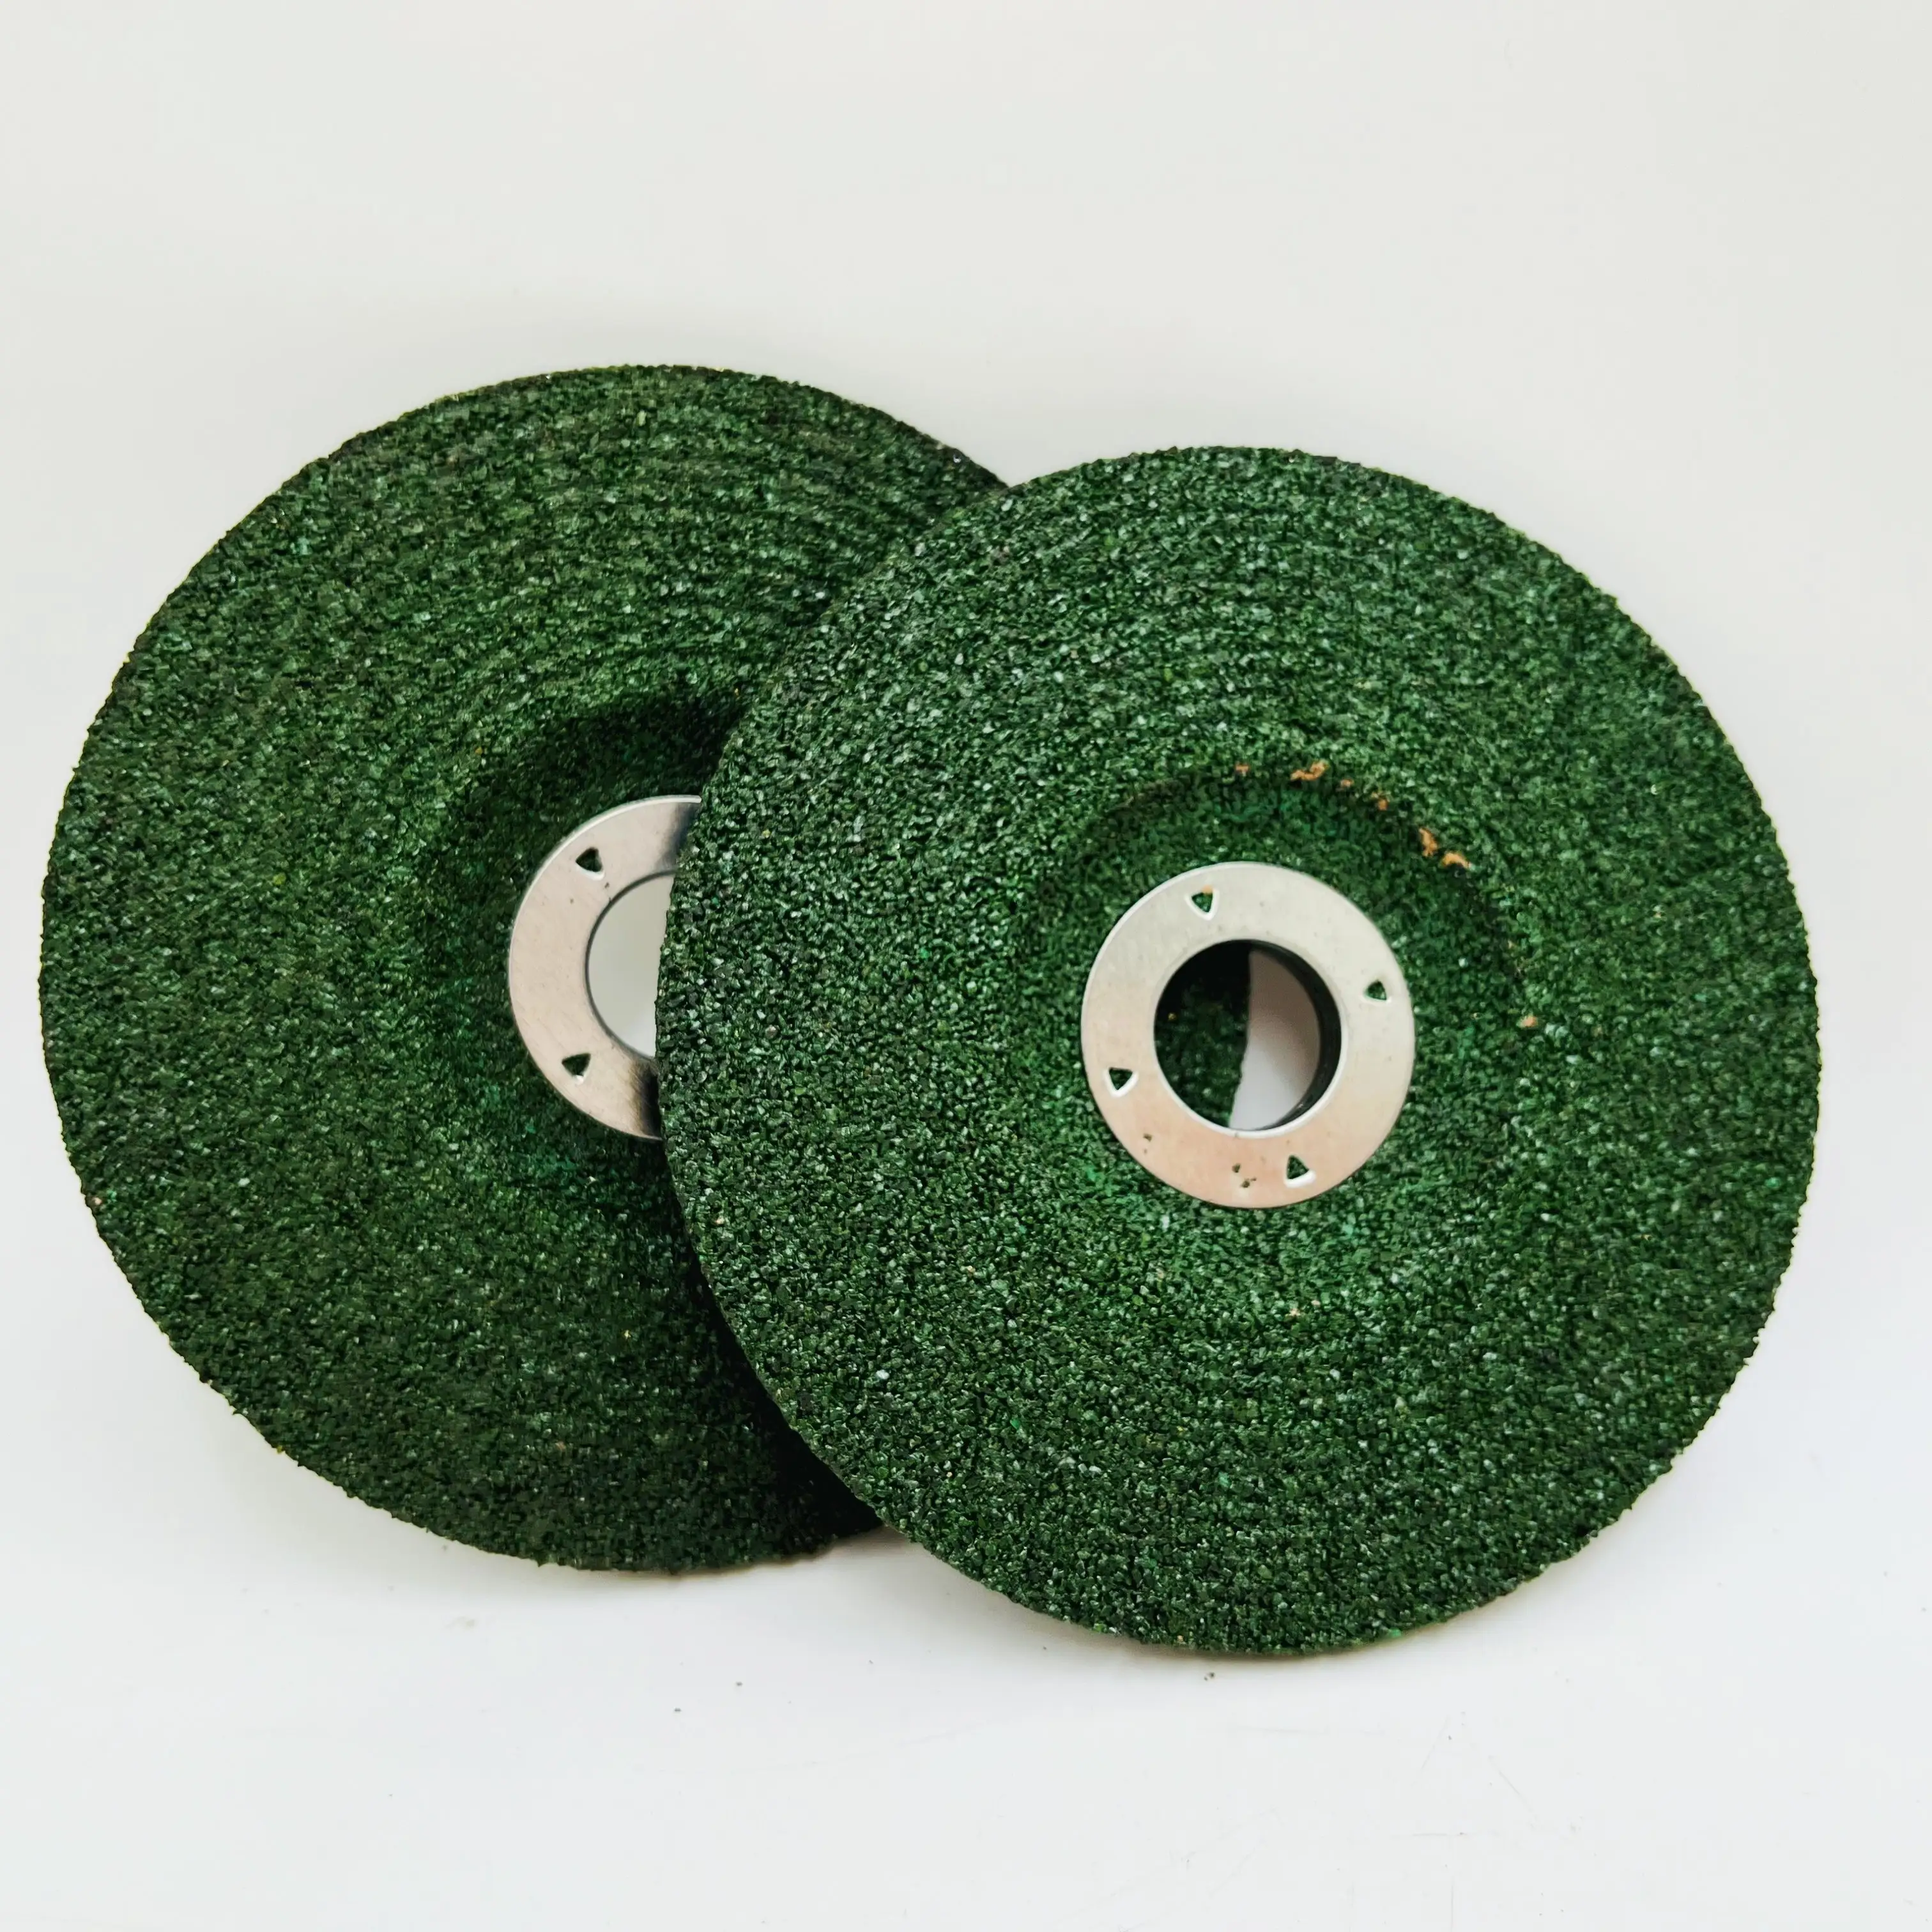 NRT 4 Inch 100x6x16mm glass fiber Abrasive angle grinding Wheel for SS and metal